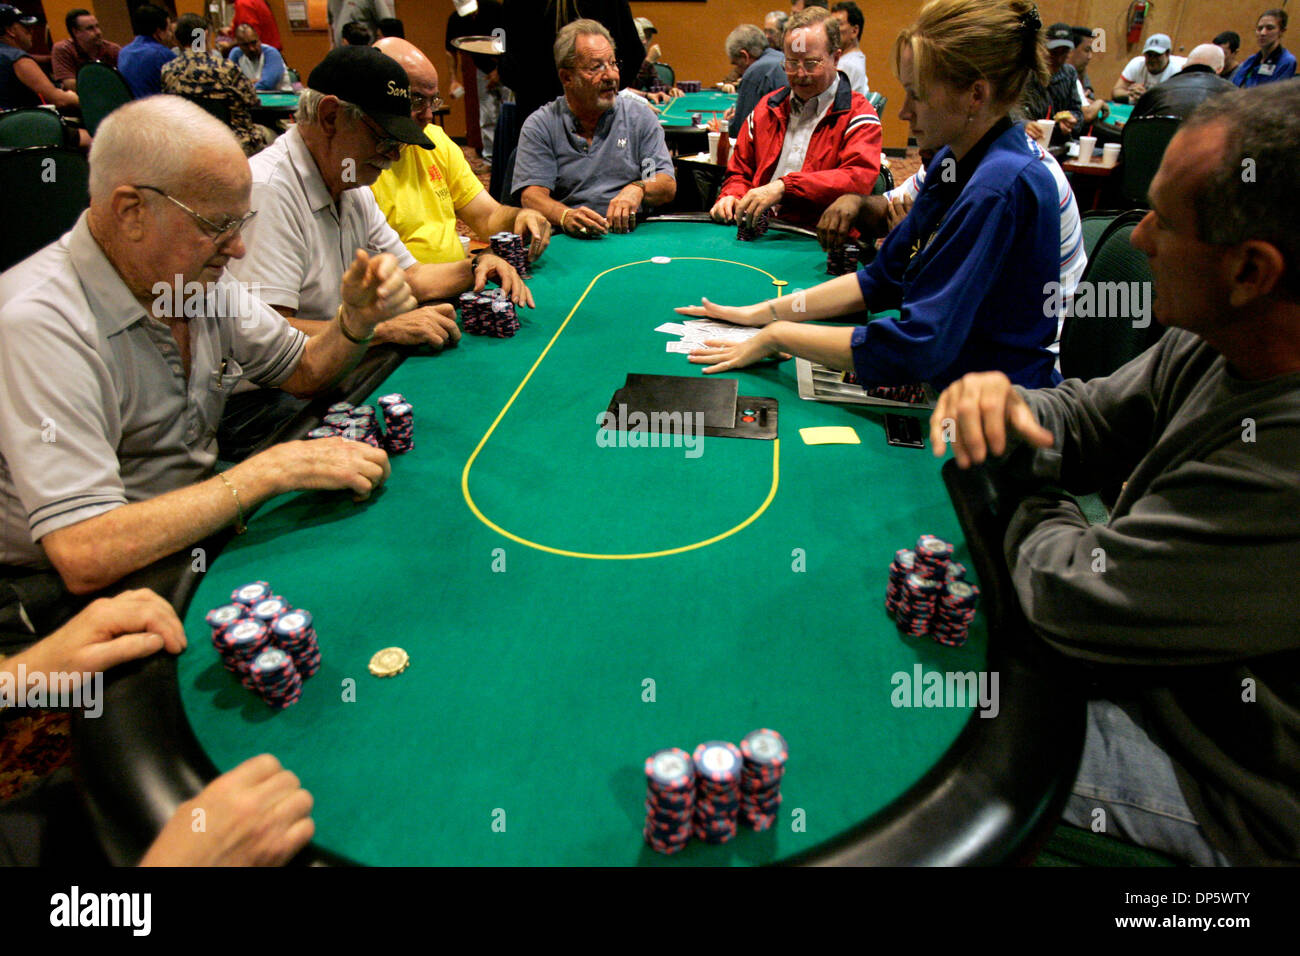 Sep 26, 2006; Alpine, CA, USA; Clockwise, from left: JIM STANFILL, LES PAYNE, CHUCK RAVENSCRAFT, HERB HOLLAND, BILL BRUNER, RICK COOK, dealer BONNIE GAY and MITCHELL LEVY, right,  banter at the poker table during a game of seven card stud at Viejas Casino near Alpine.  Mandatory Credit: Photo by Laura Embry/SDU-T/ZUMA Press. (©) Copyright 2006 by SDU-T Stock Photo